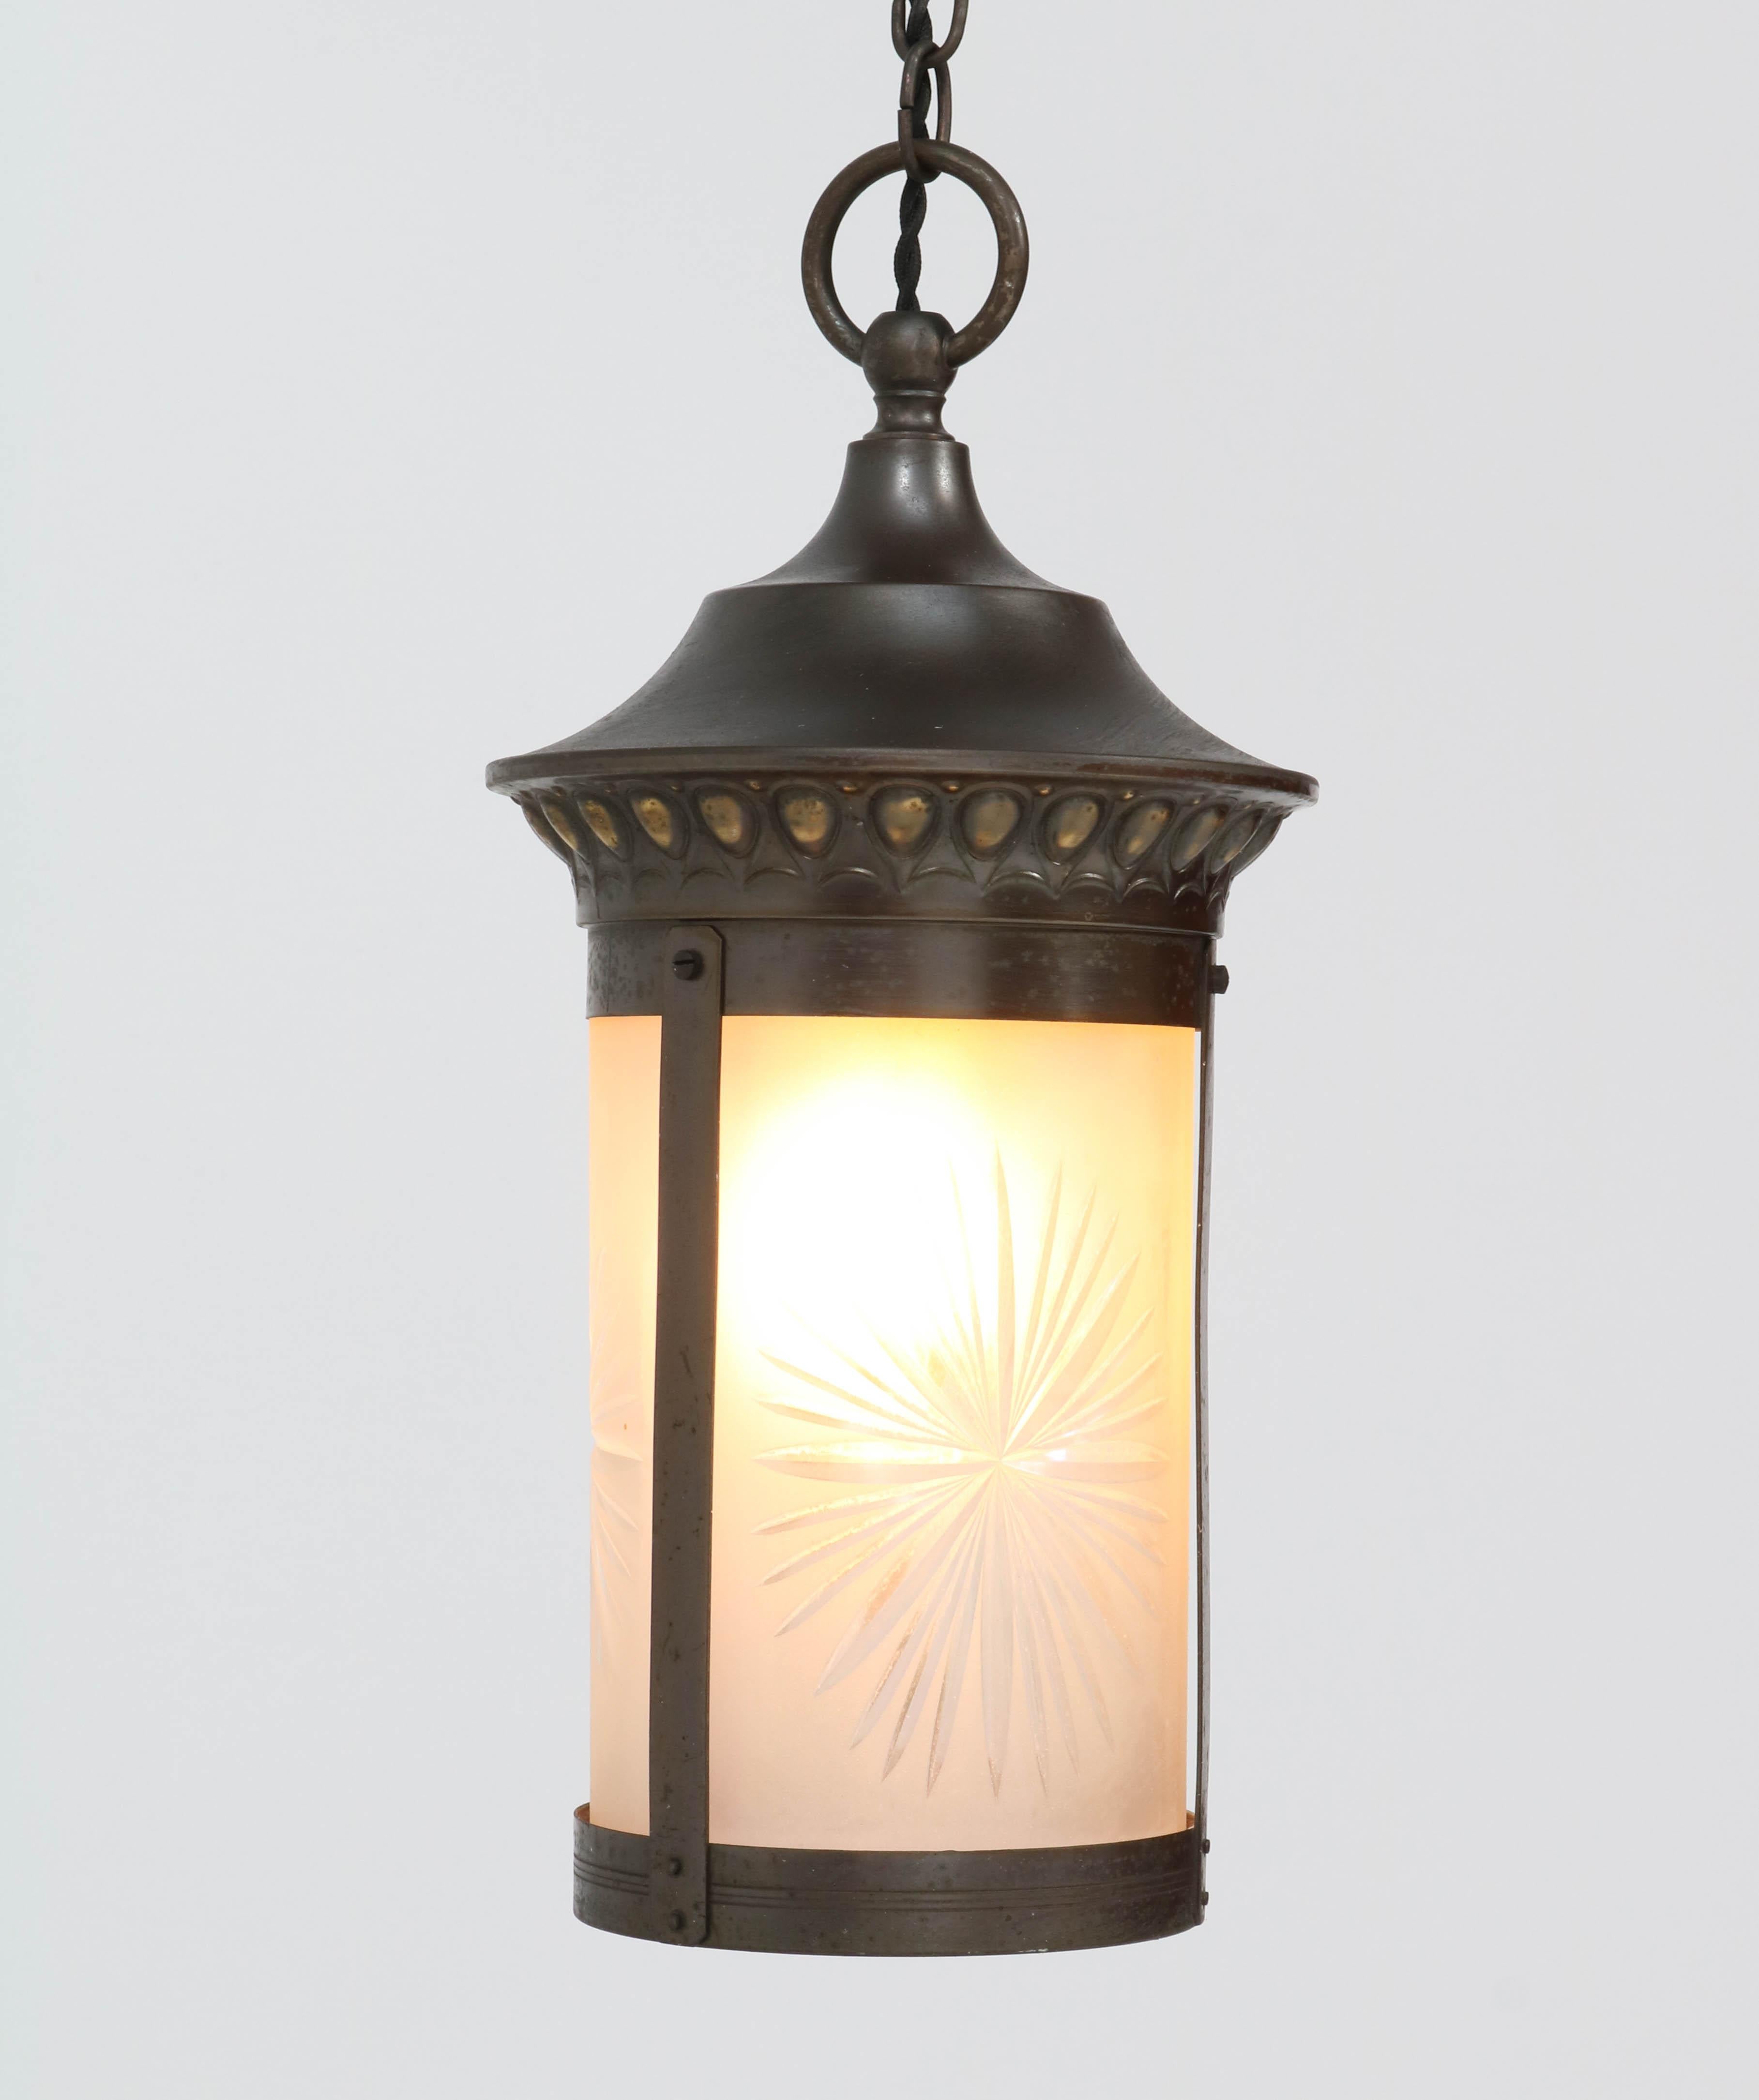 Patinated Brass Art Nouveau Lantern with Etched Glass, 1900s For Sale 4